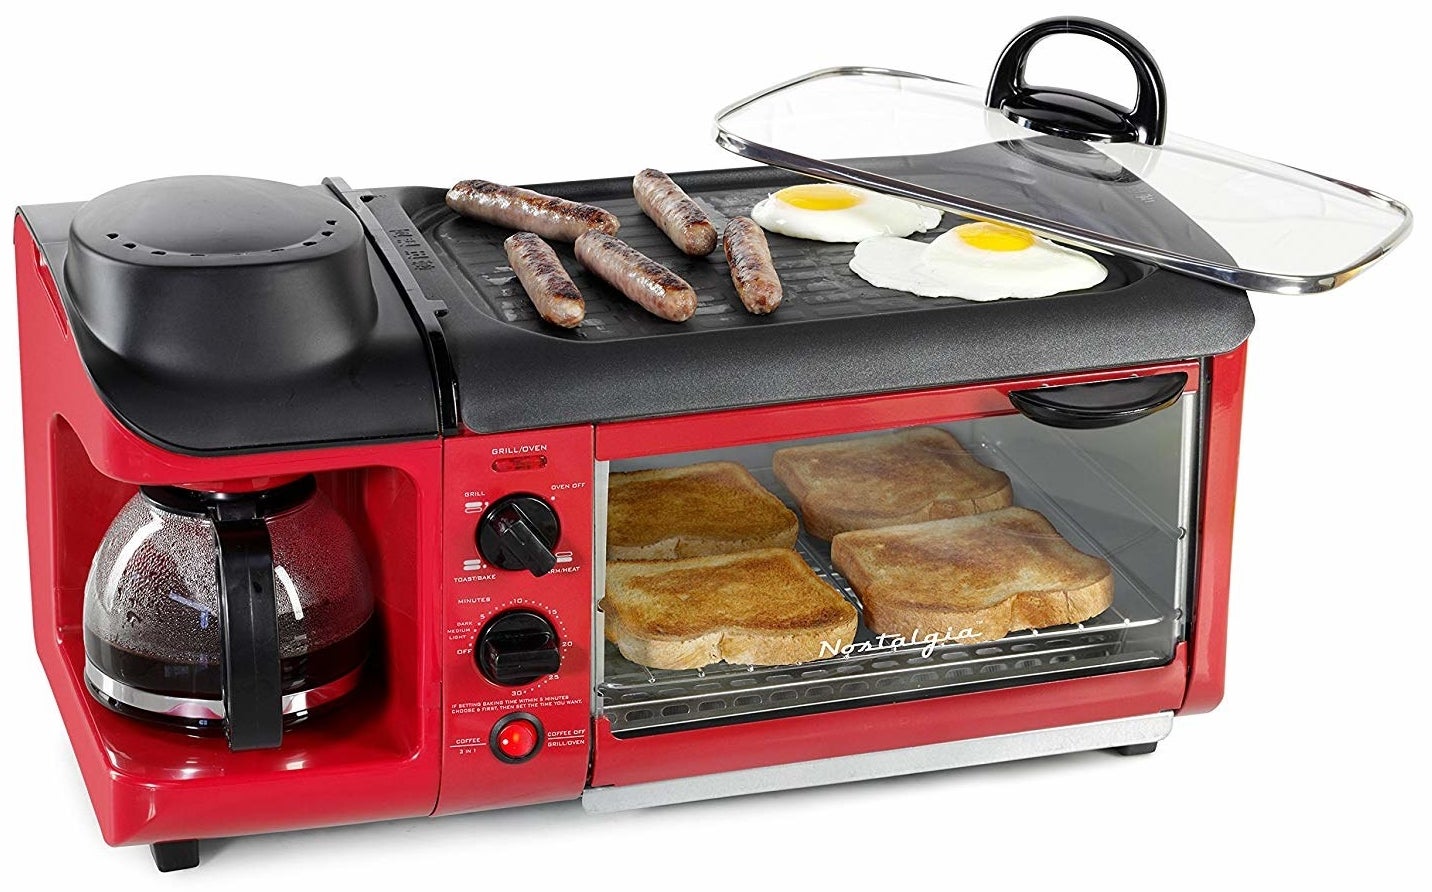 The red breakfast station being used to make eggs, sausage, toast, and a pot of coffee